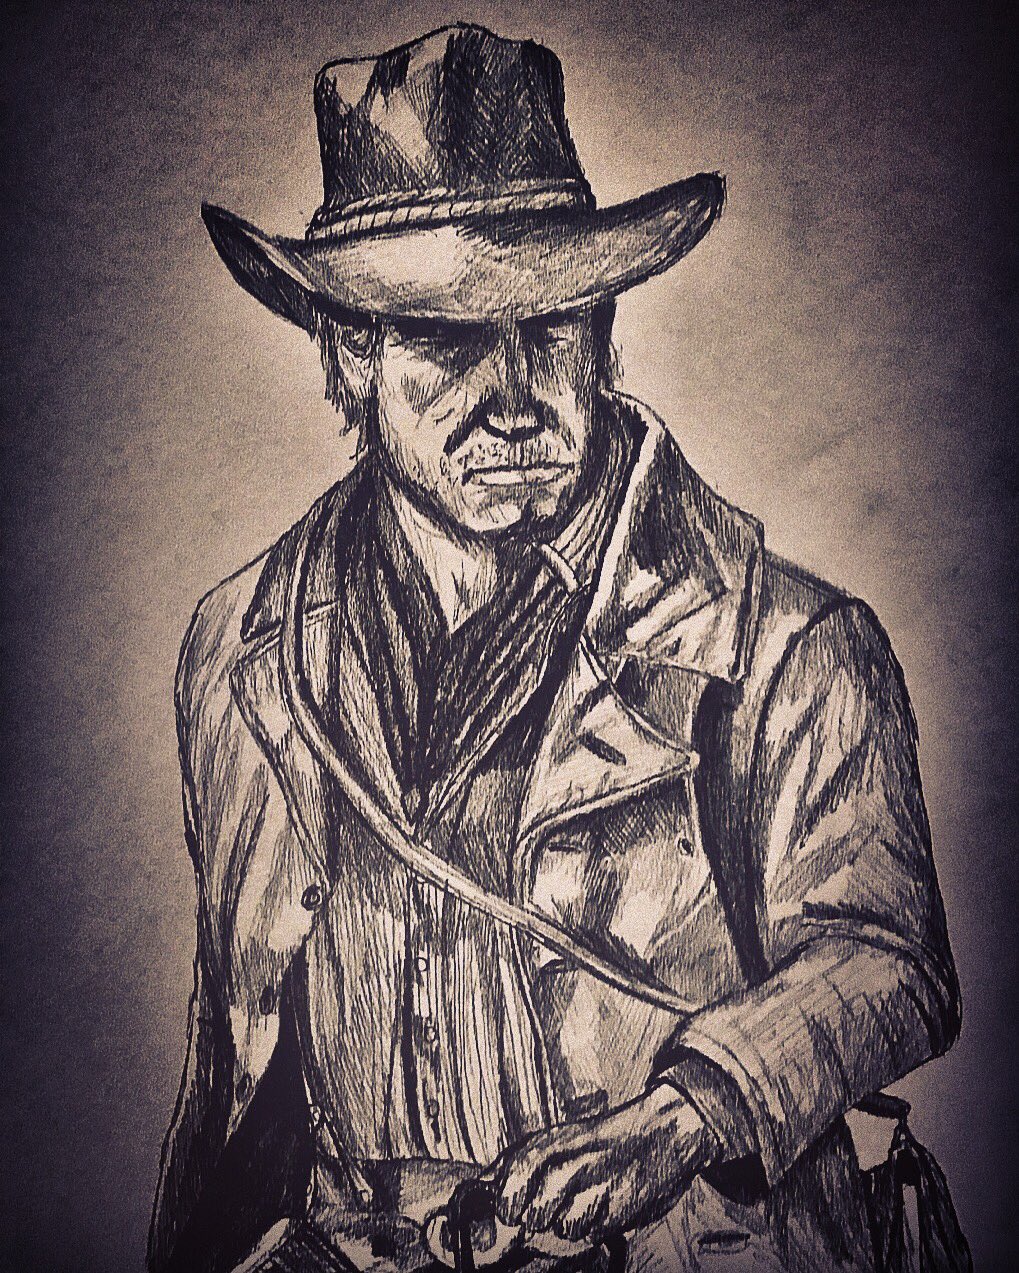 TheWolvesFray on Twitter: "Here's a quick I did of Arthur Morgan the new protagonist of RED DEAD REDEMPTION I hope you enjoy! # RedDeadRedemption #RedDeadRedemption2 #outlawsforlife #arthurmorgan . @LegacyKillaHD @RedDeadBase @